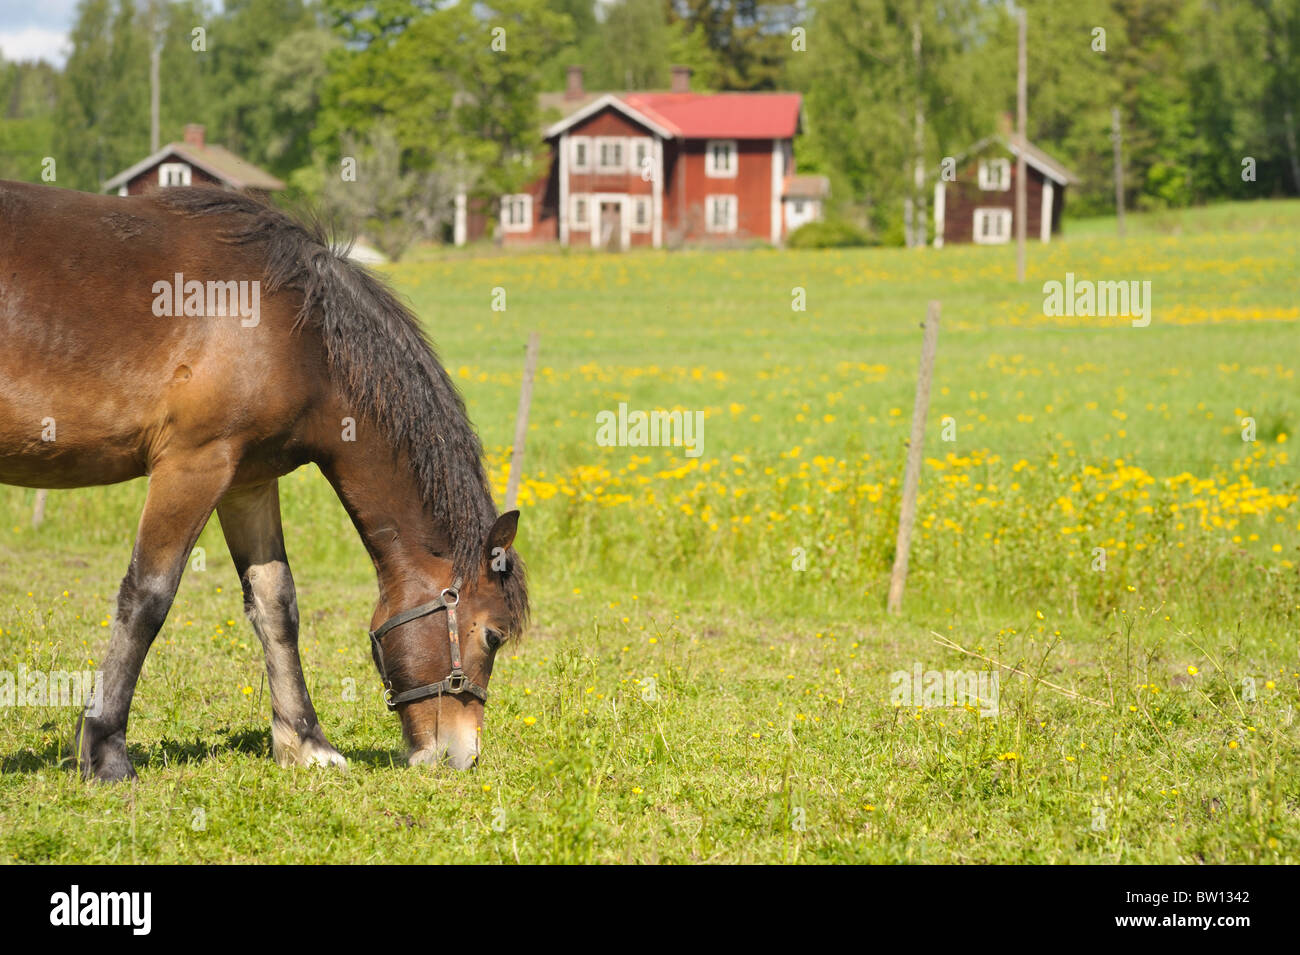 Horse grazing in front of traditional red house, Sweden, Europe Stock Photo